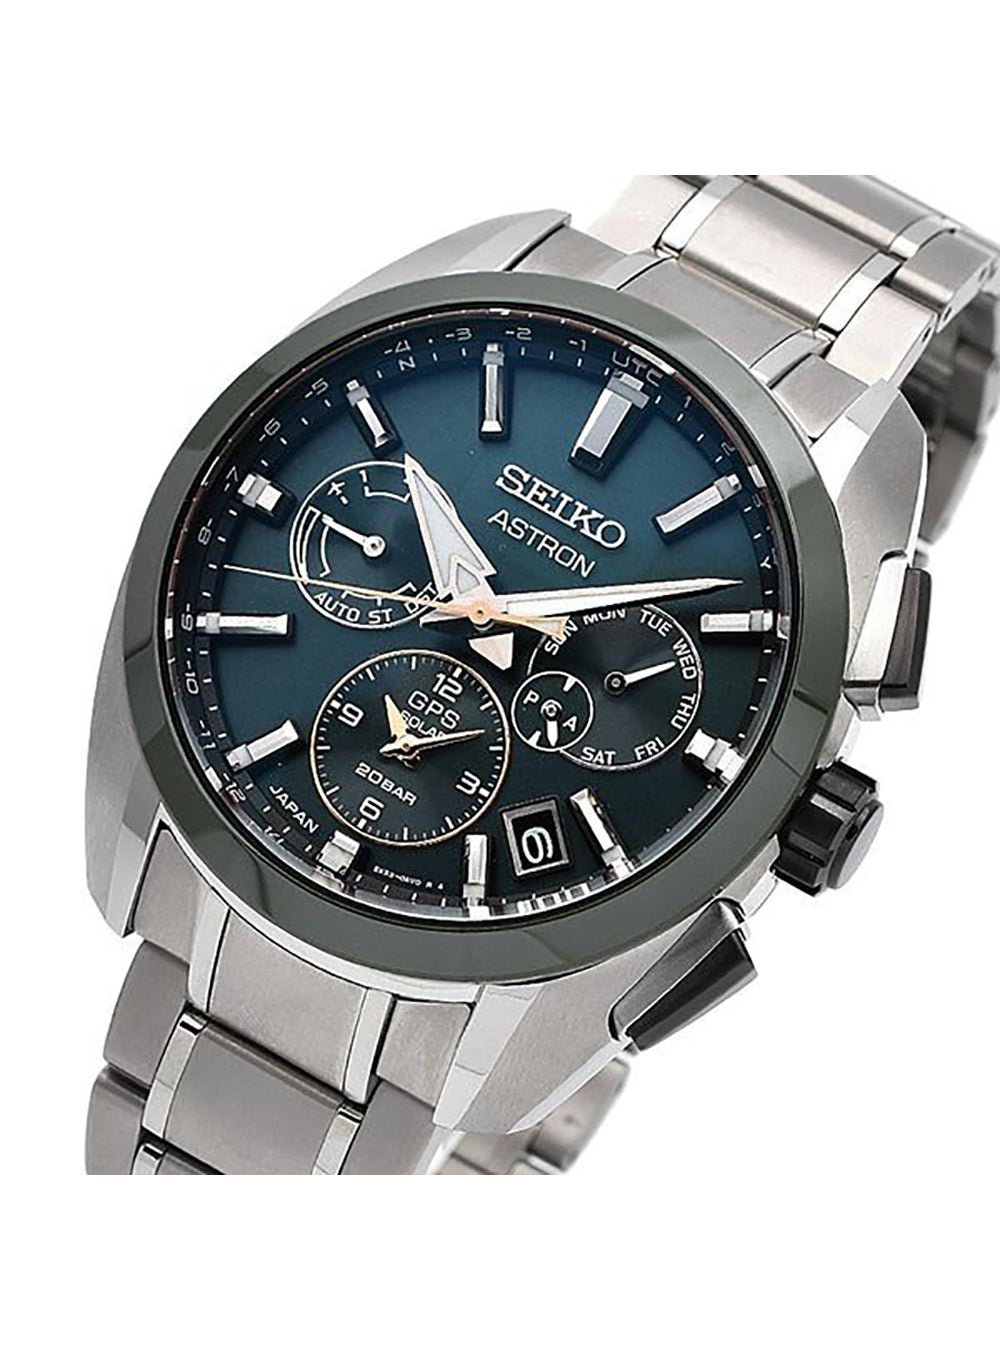 SEIKO ASTRON LIMITED EDITION SBXC071 MADE IN JAPAN JDMWRISTWATCHjapan-select